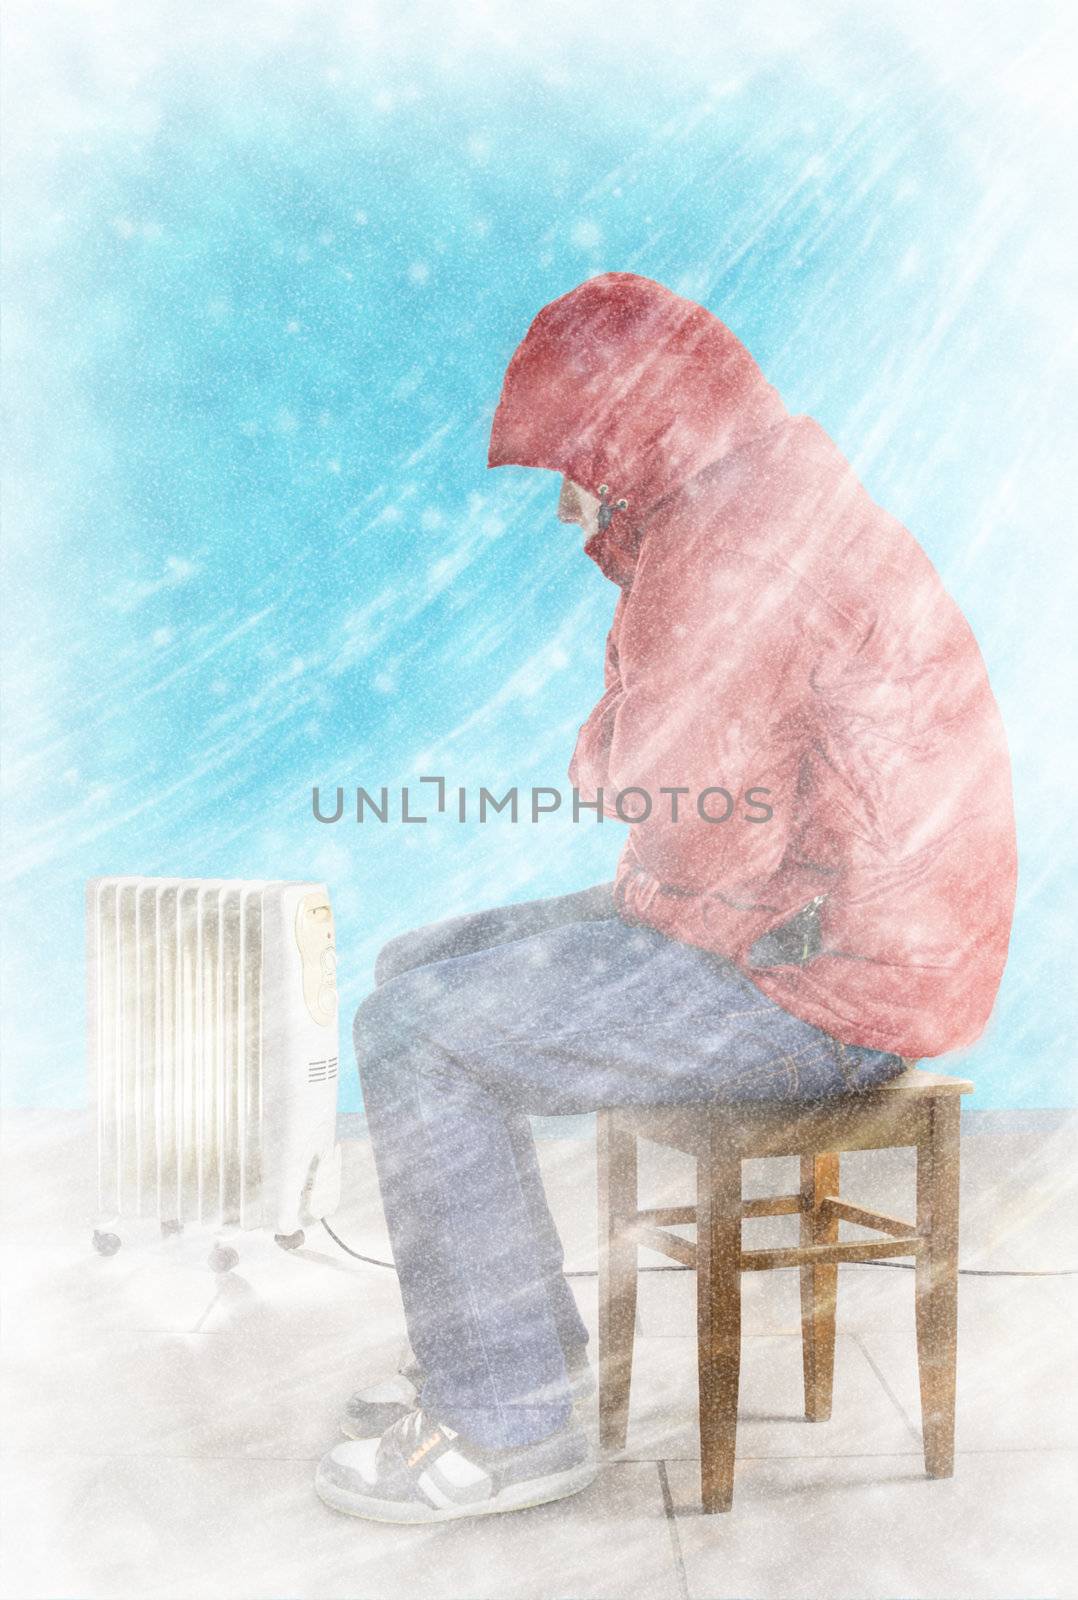 Cold winter wind with snow blows in the living room. Freezing guy in warm clothes is sitting near the heating radiator.